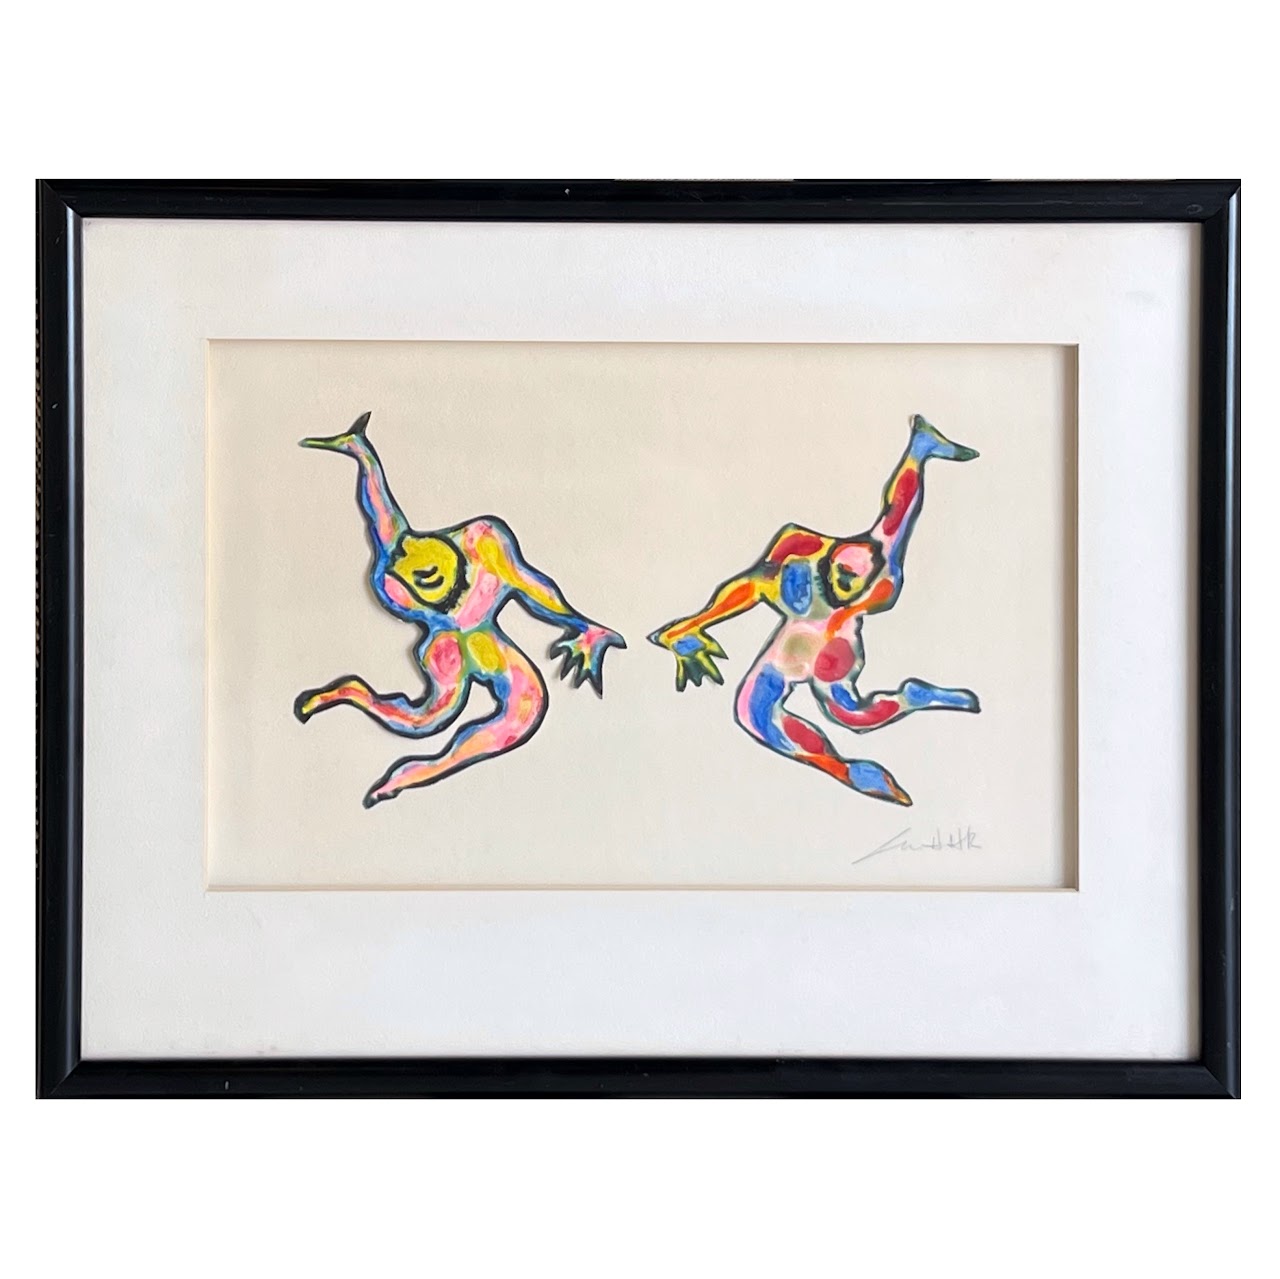 Dancing Figures Signed Mixed Media Painting